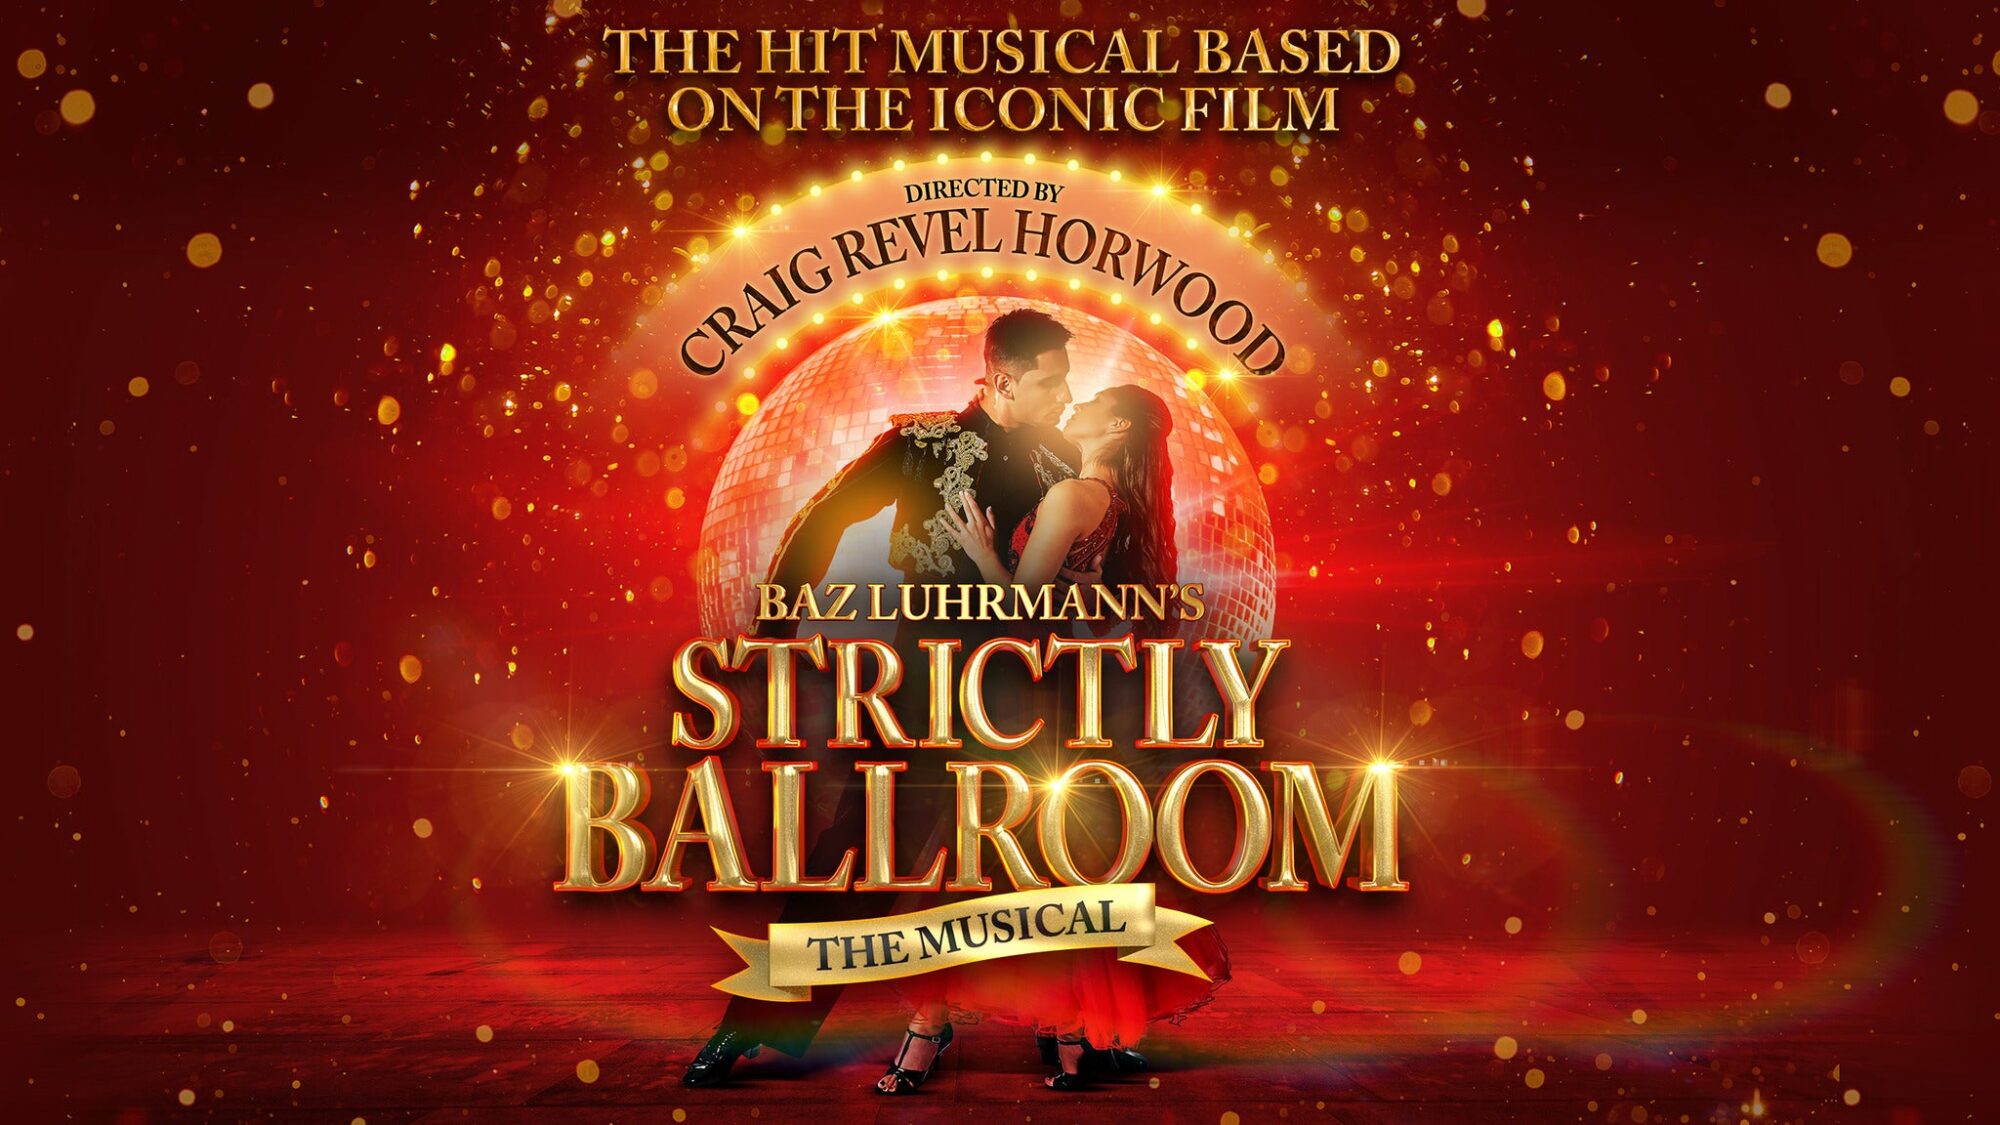 Image name Strictly Ballroom The Musical at Hull New Theatre Hull the 16 image from the post Events in Yorkshire.com.